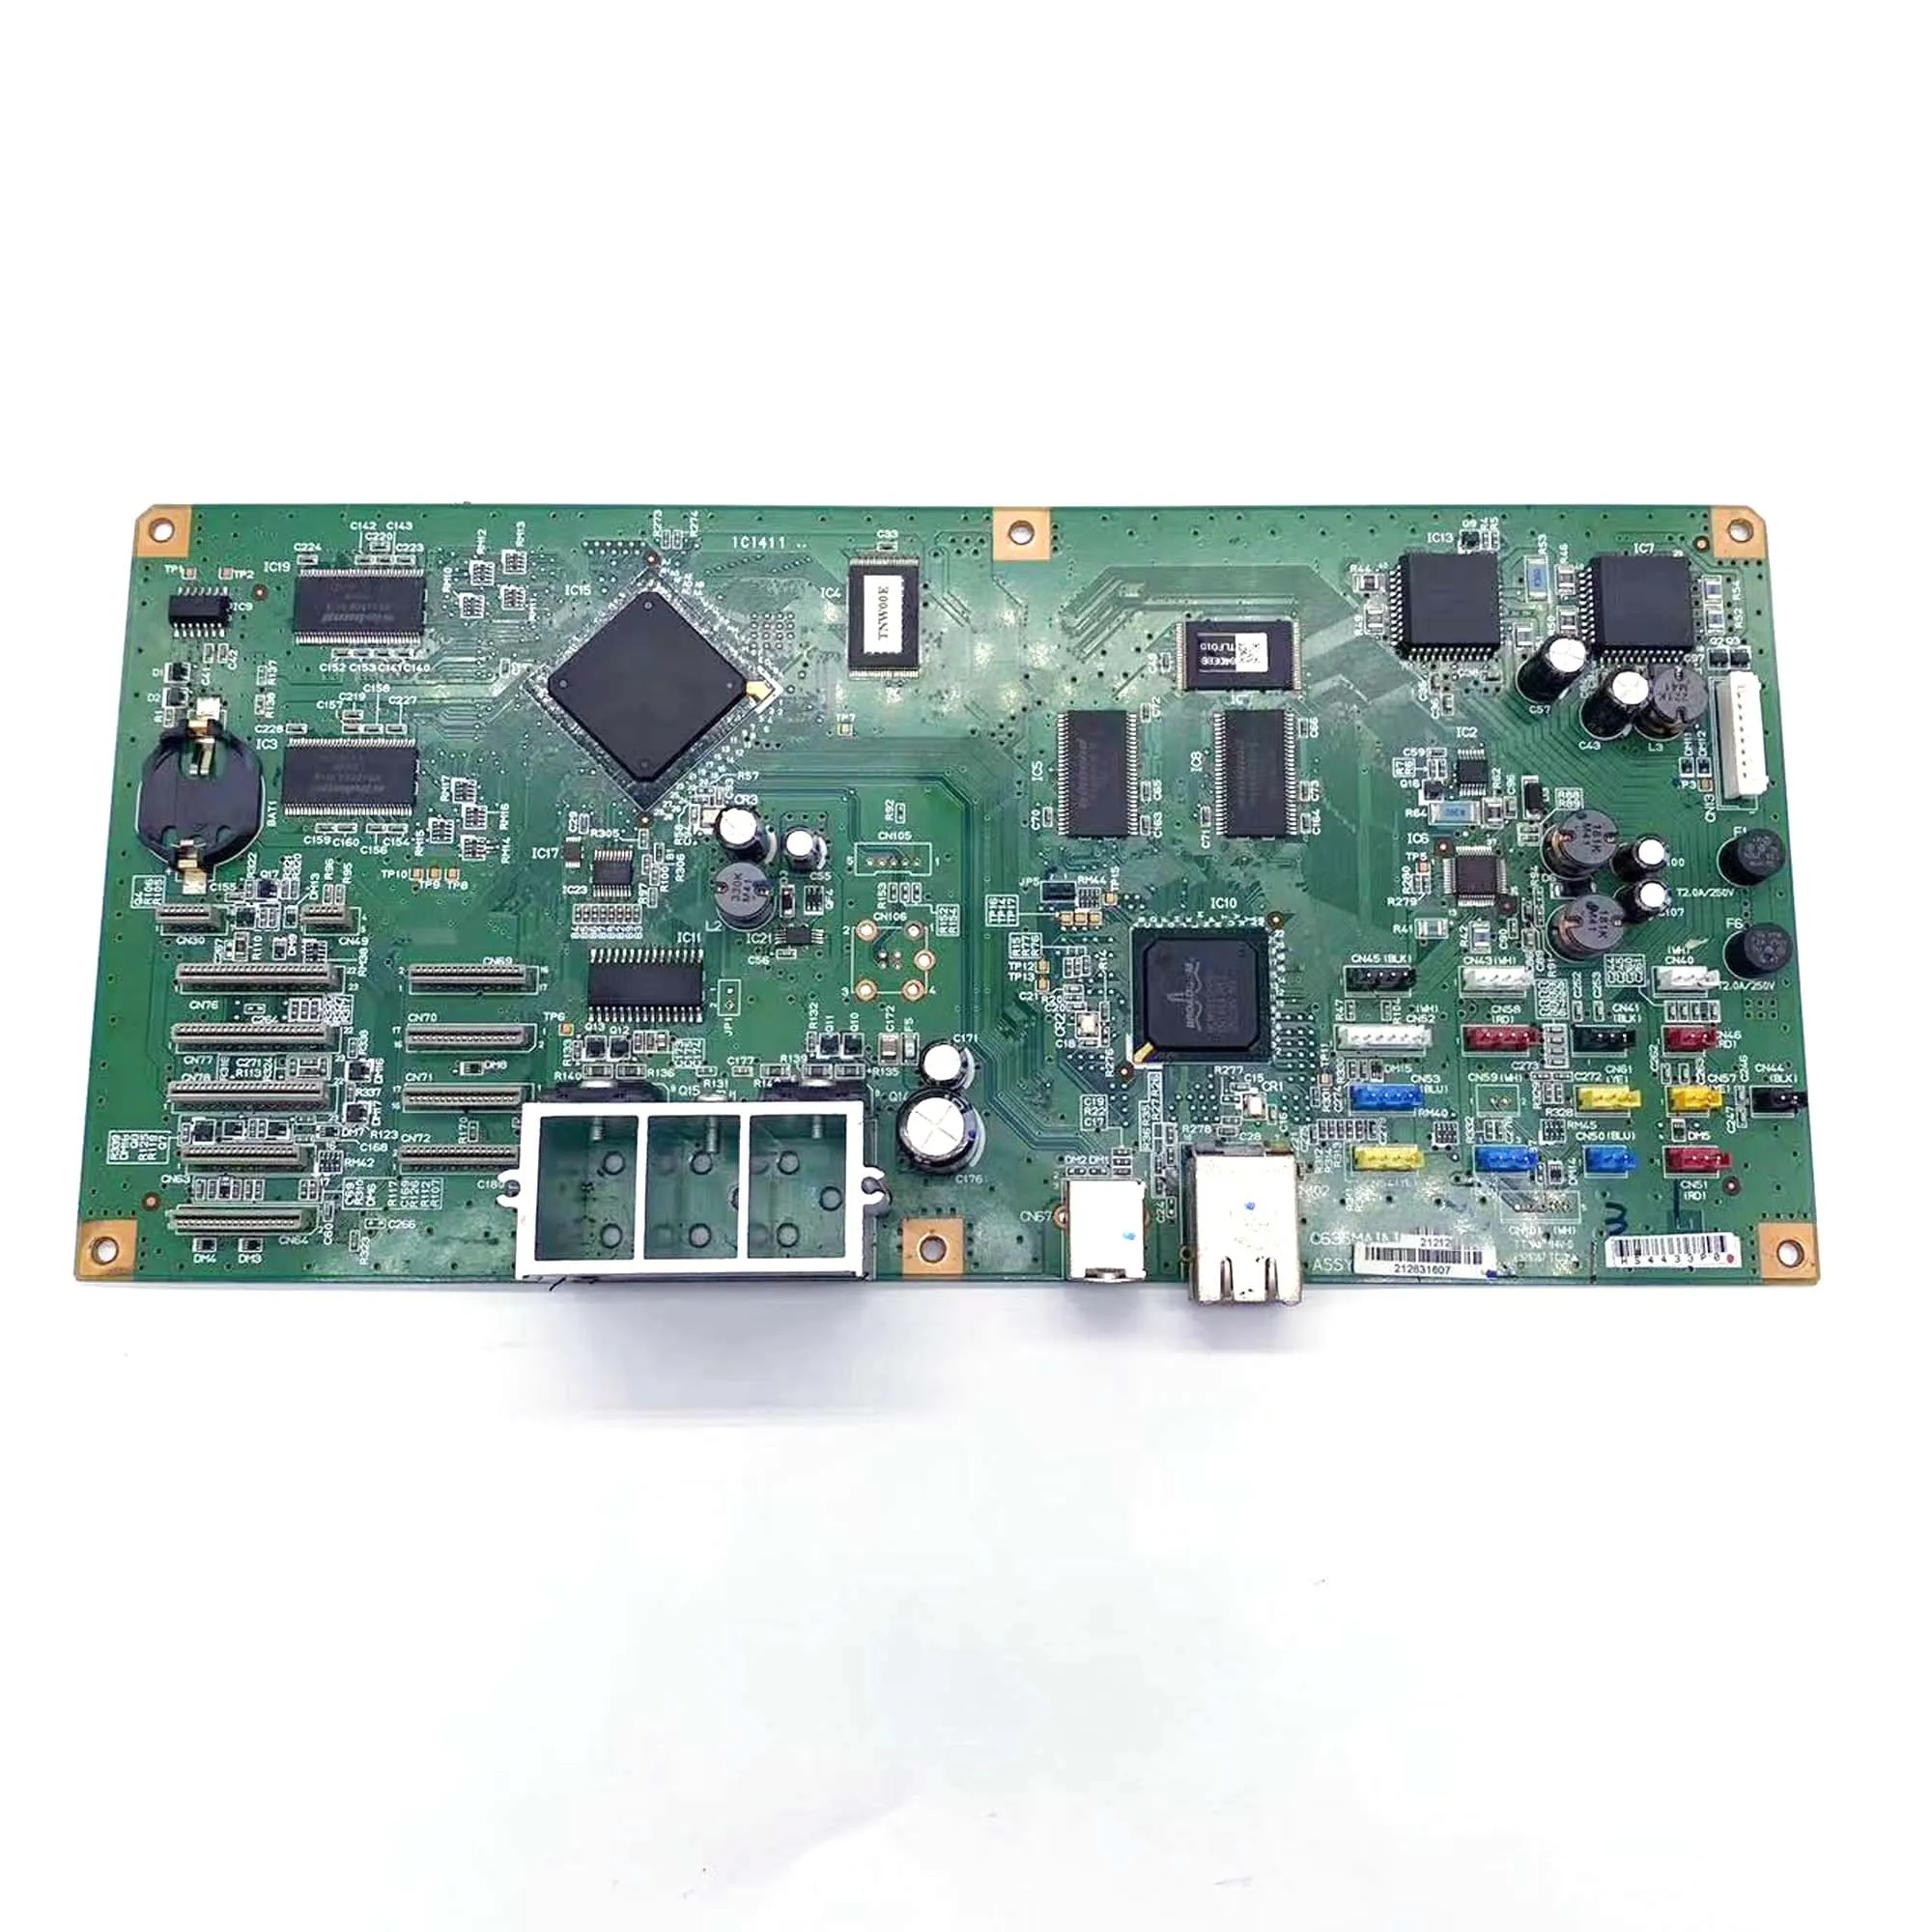 

Main Board Motherboard C635 Fits For Epson Stylus Pro 3800